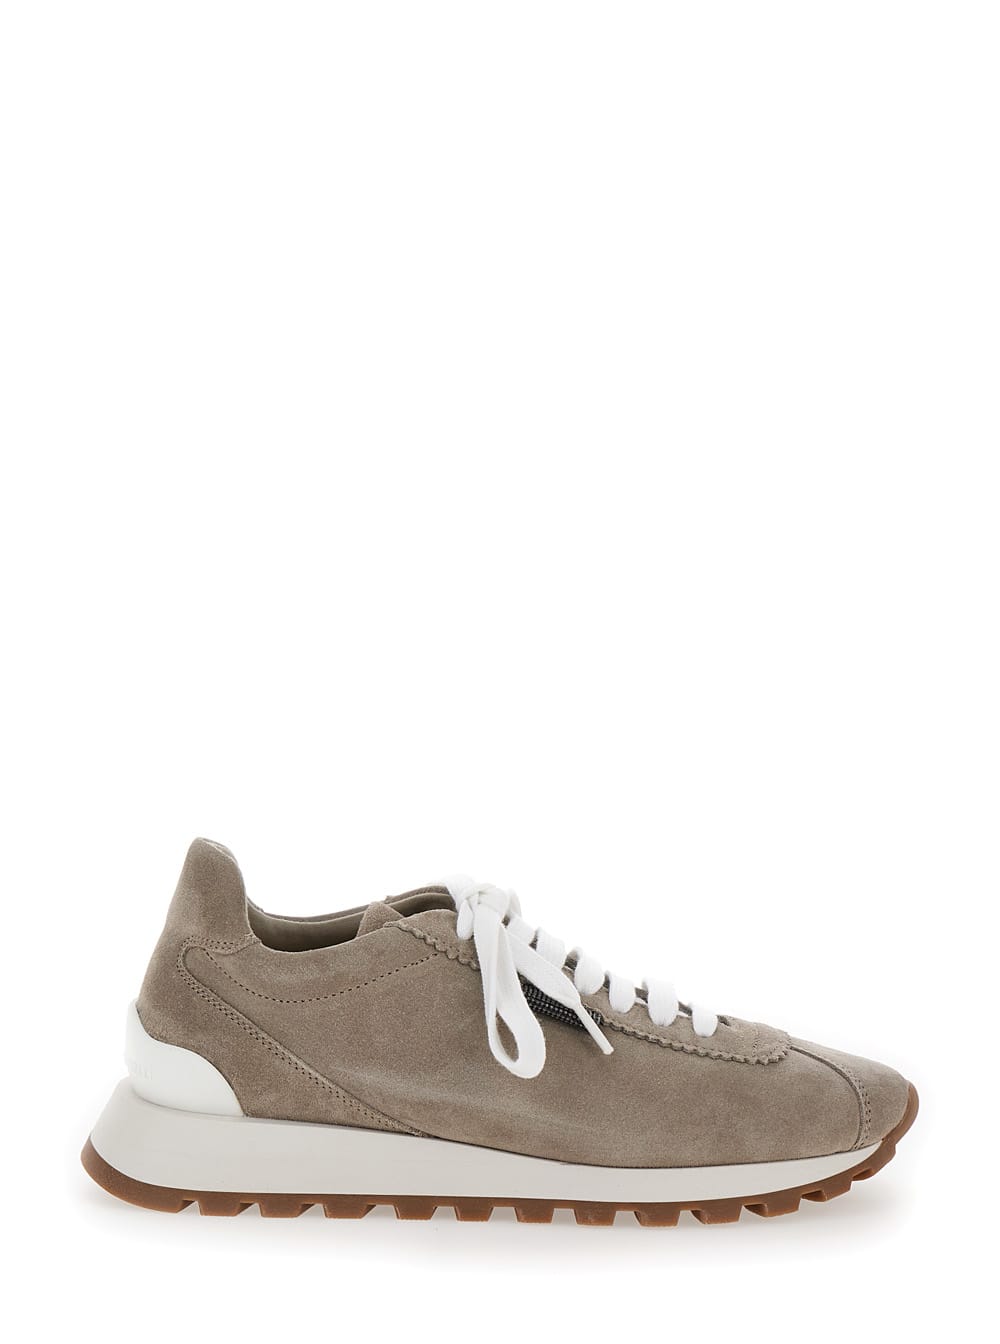 Beige Low Top Sneakers With Rubber Sole In Suede Woman